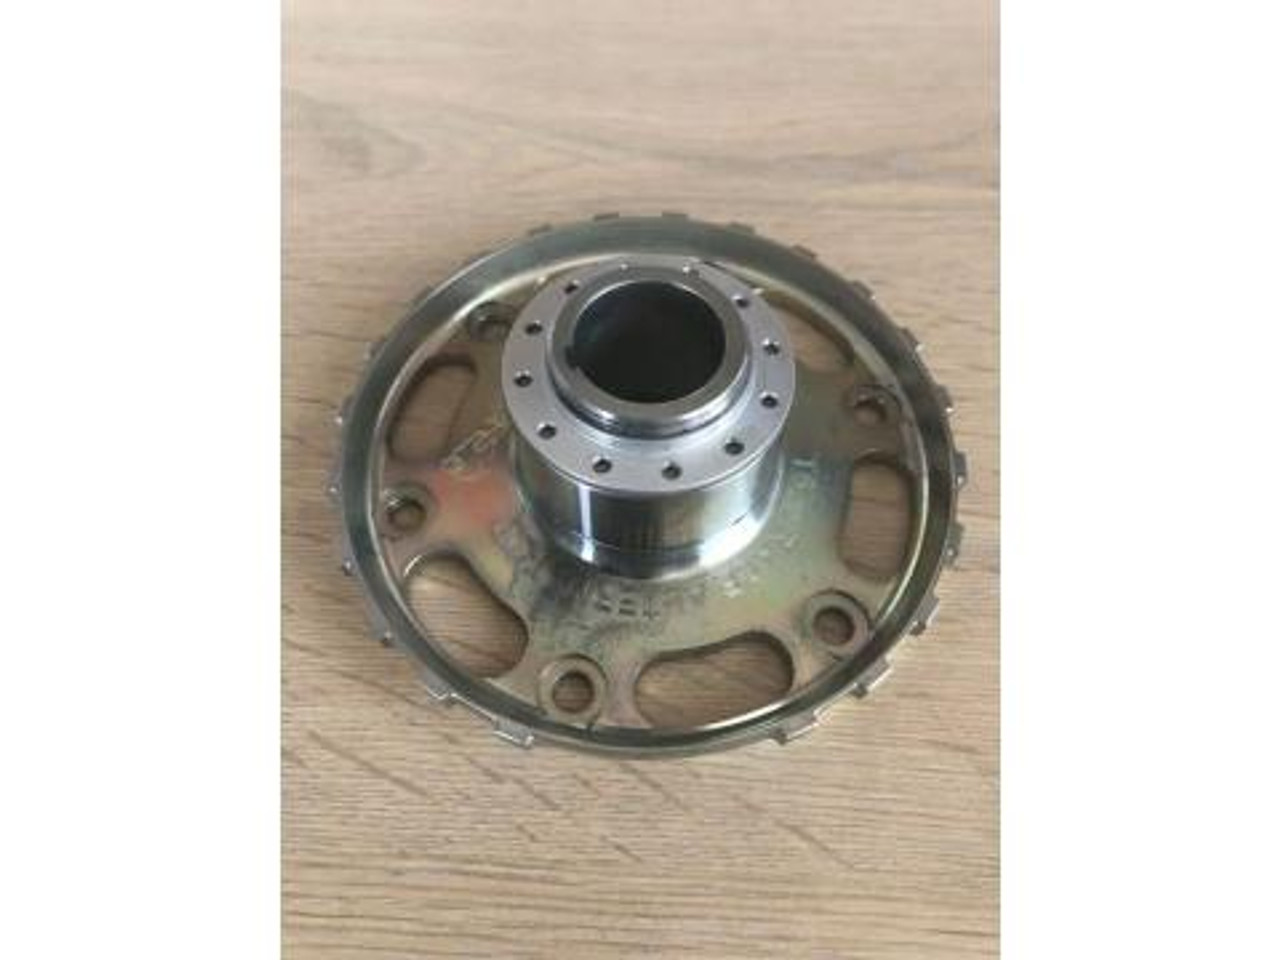 Rotor T675 06-13
Lightweight generator rotor assembly. 
Replacement part for Triumph T675 2006 to 2012, Rotor and Magnet are pre assembled..